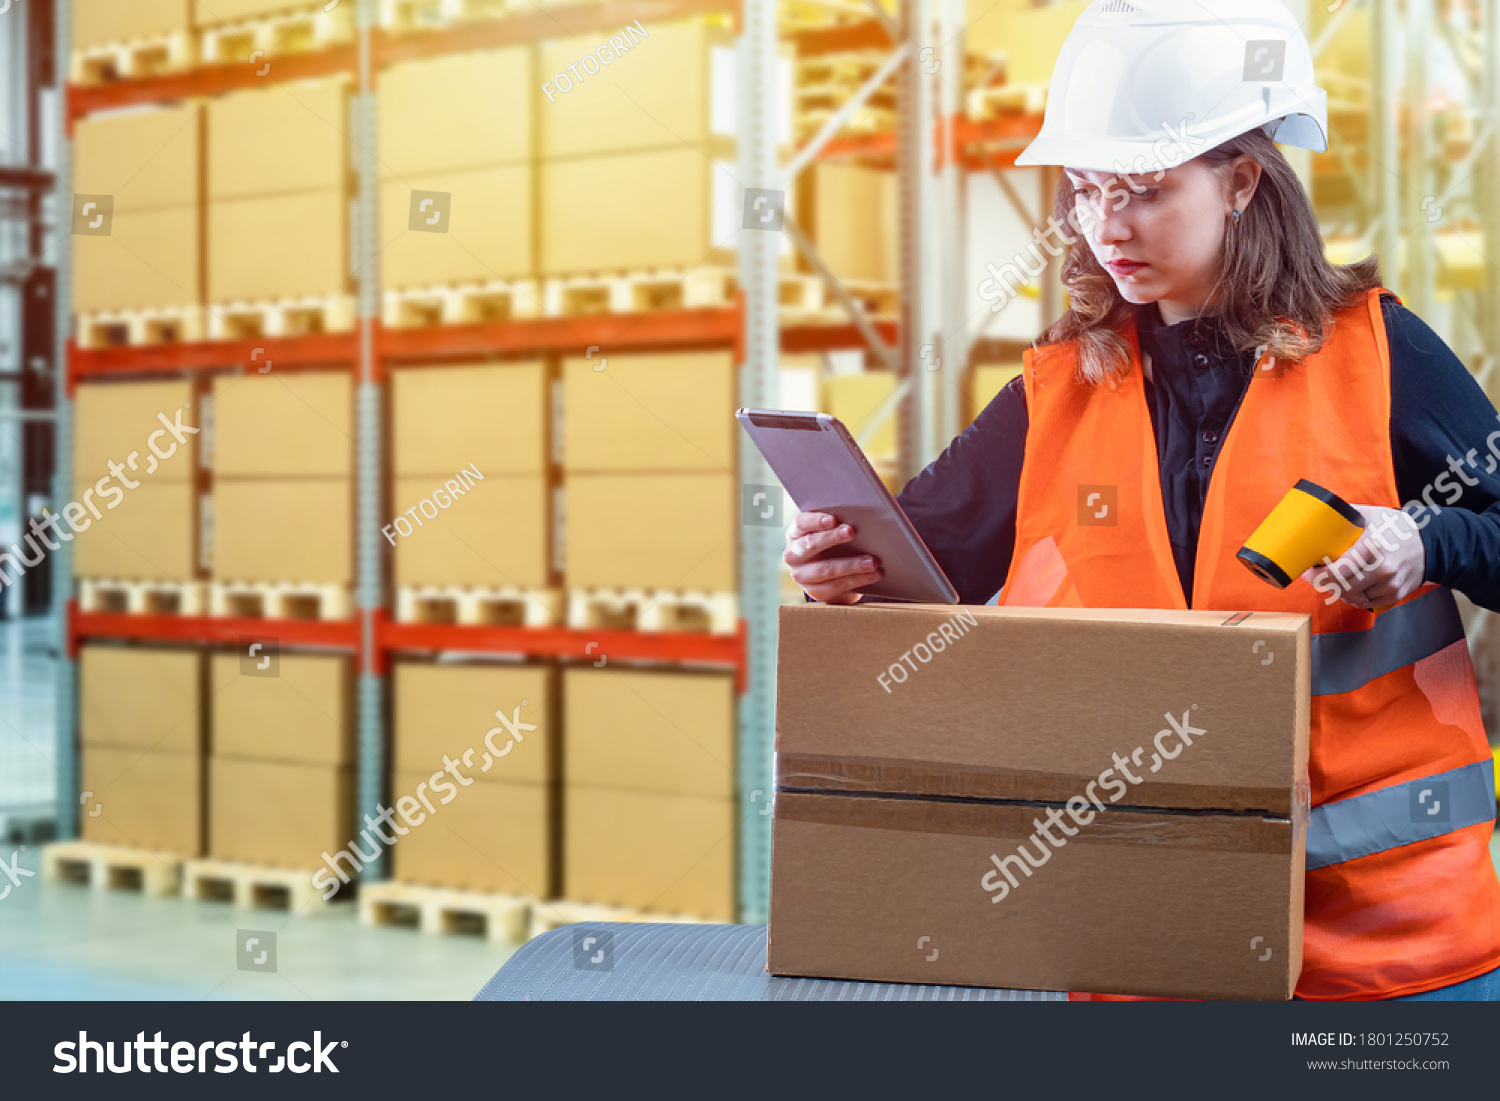 Customs registration. Girl with a scanner in the warehouse. Woman works on customs. Woman uses a barcode scanner. Passage of goods across the border. Customs officer registers postal items. #1801250752